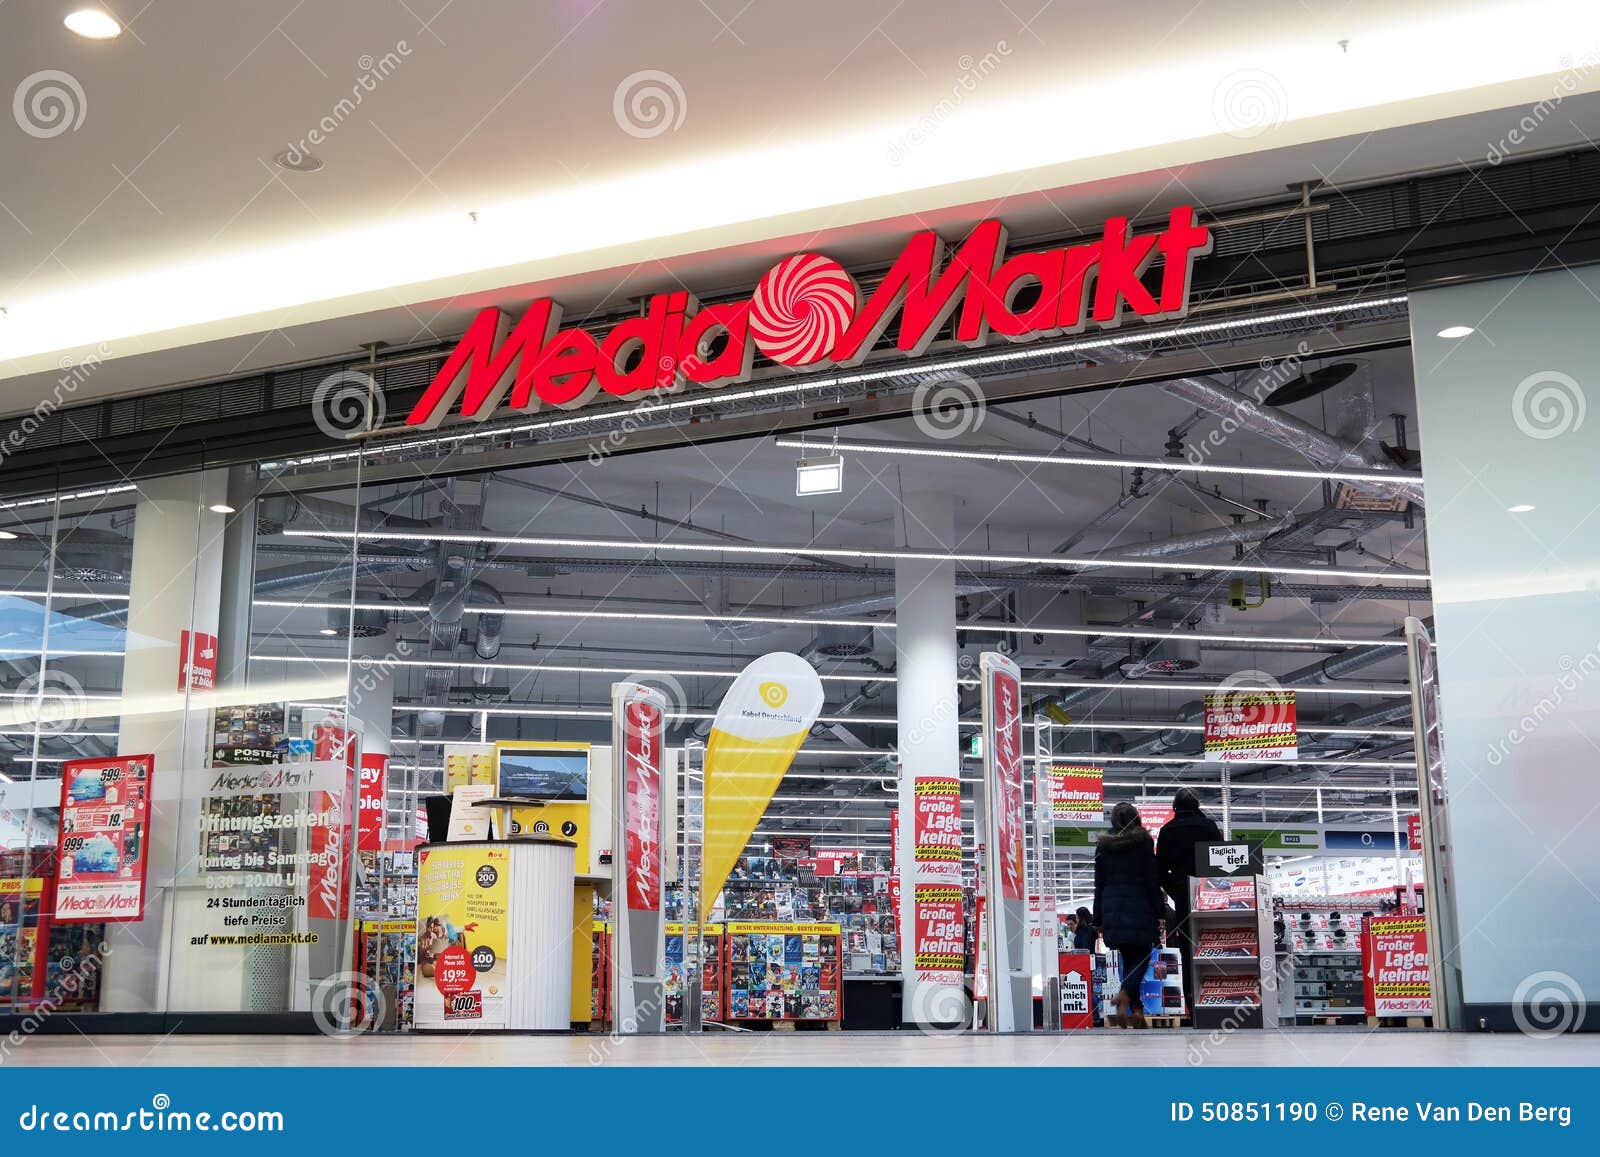 PAPENBURG, GERMANY - AUGUST 2015: Entry Of A Media Markt Store. Media Markt  Is A German Chain Of Stores Selling Consumer Electronics With Numerous At  Branches Throughout Europe And Asia. Stock Photo